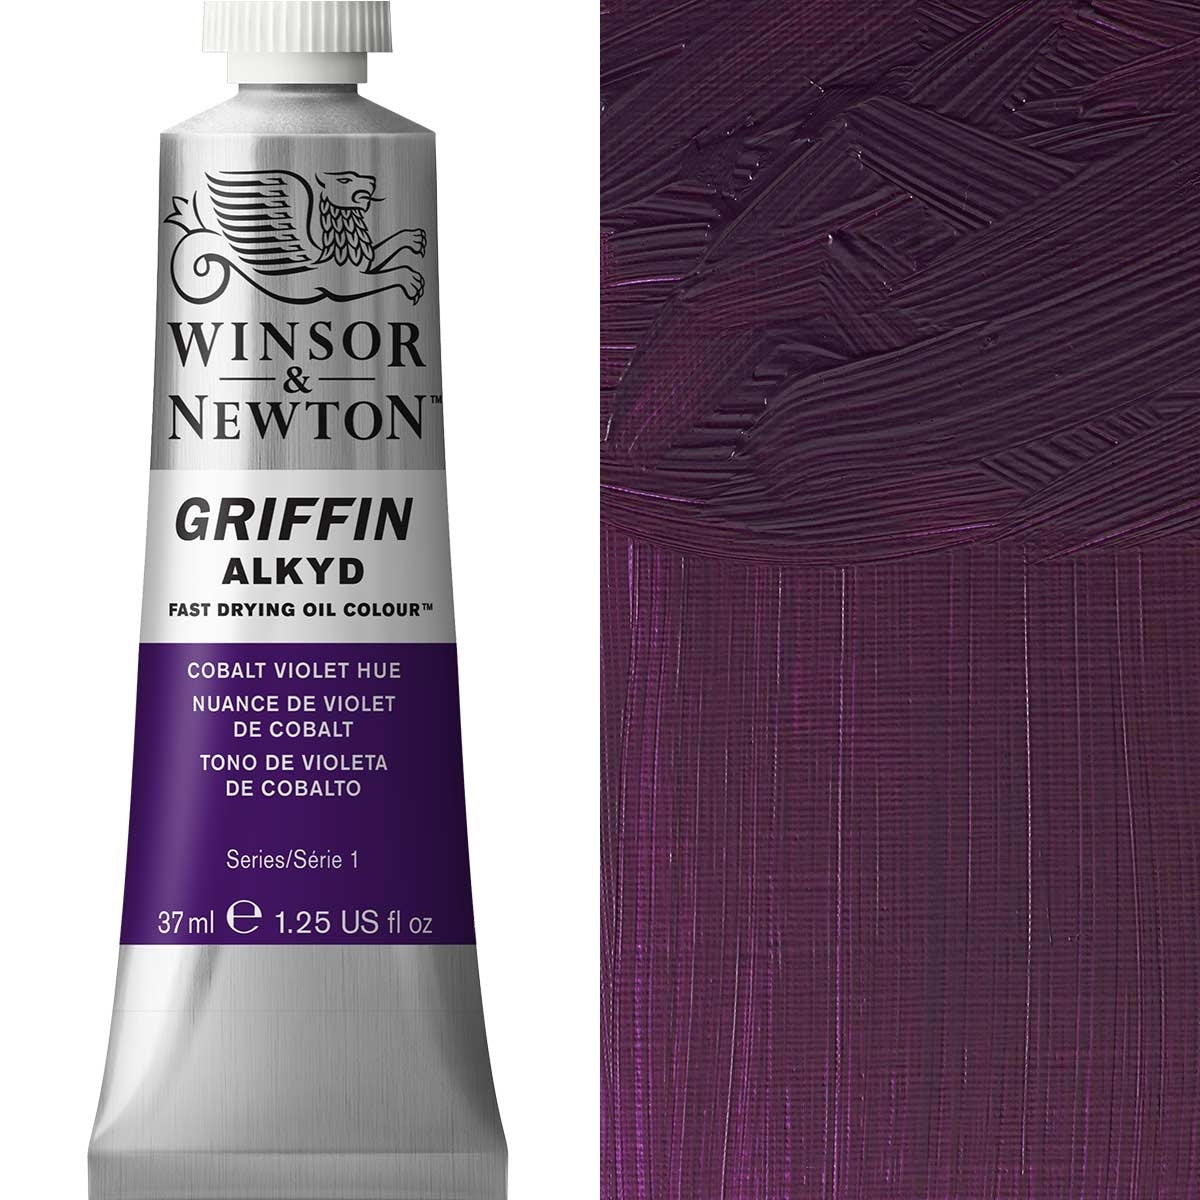 Winsor and Newton - Griffin ALKYD Oil Colour - 37ml - Cobalt Violet Hue